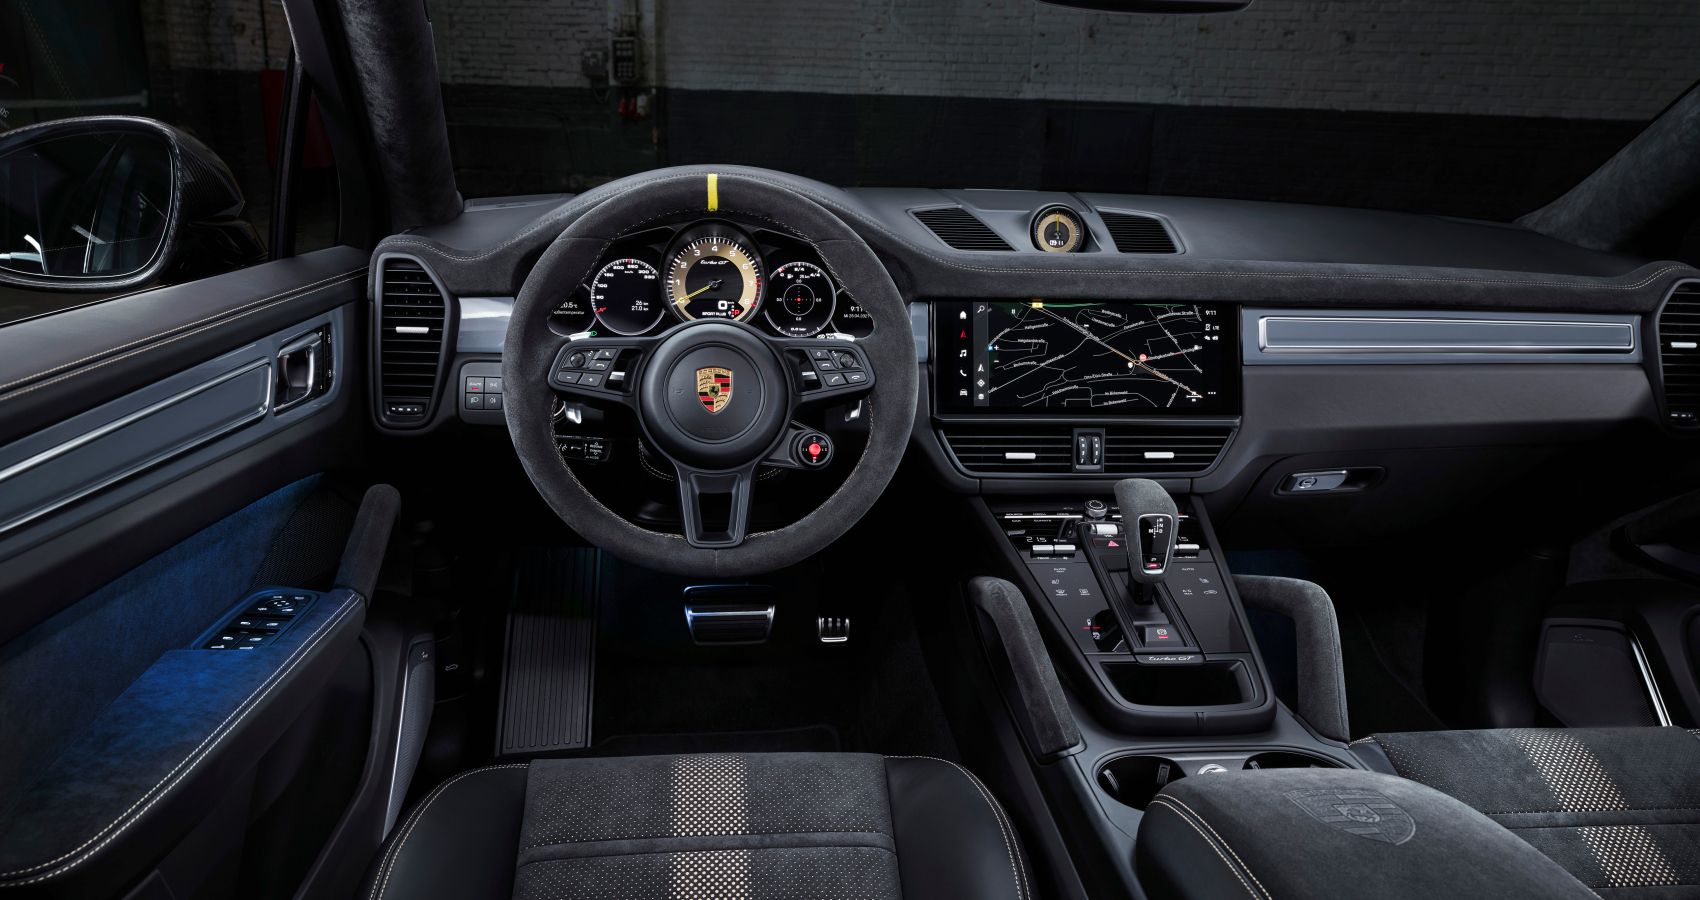 The flagship Cayenne Turbo GT interior with Chrono Package